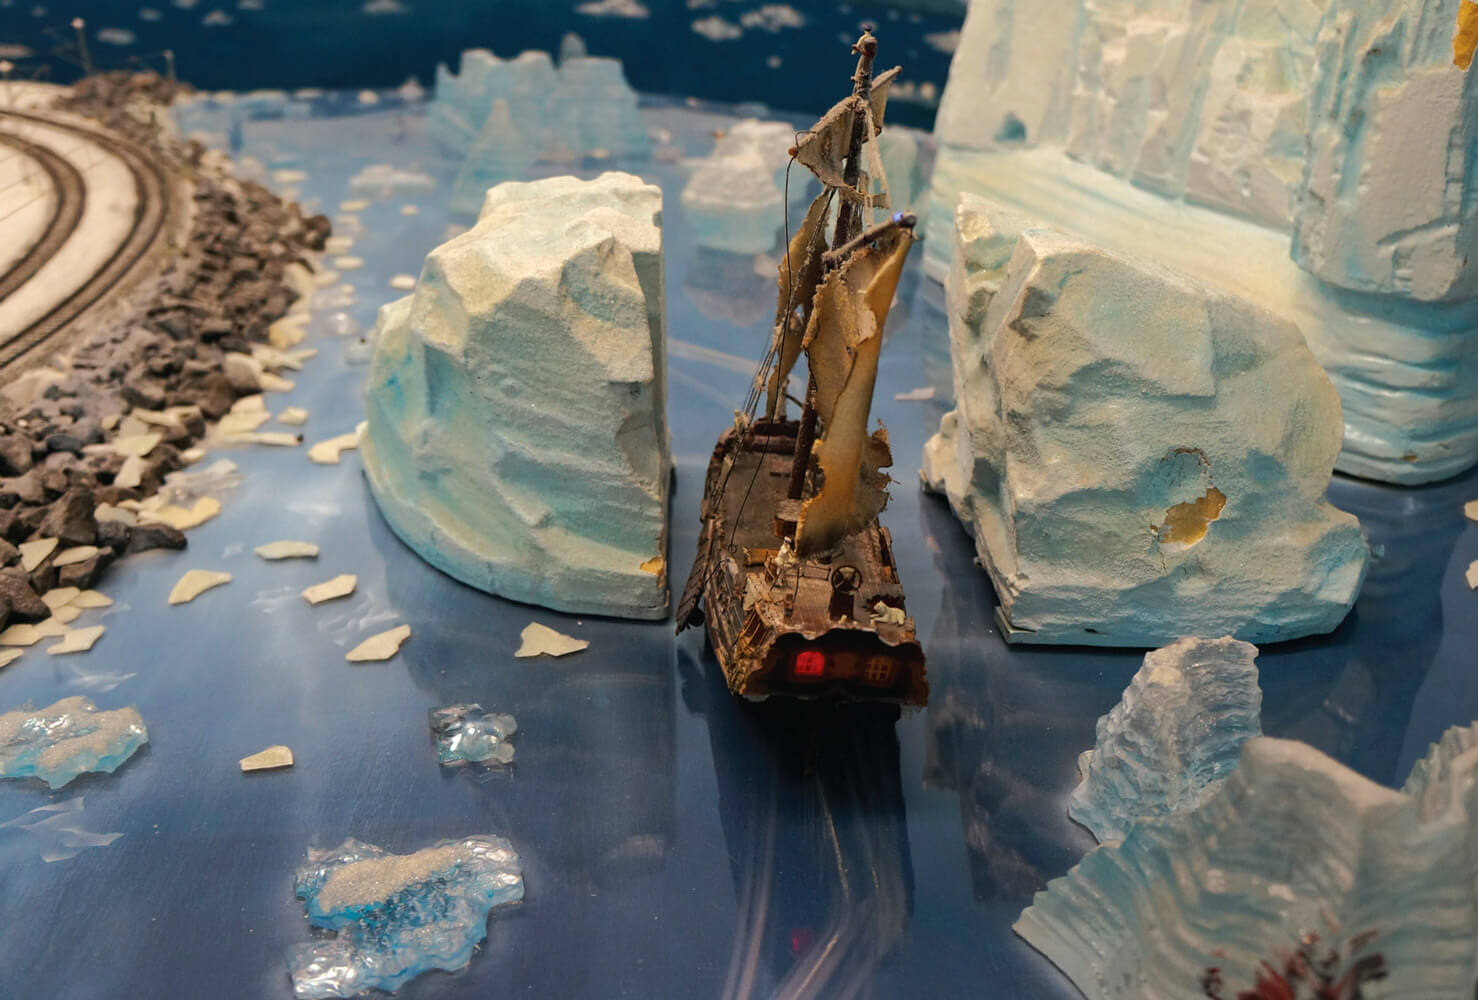 A photograph of a miniature sail boat navigating between two icebergs at the Miniatur Wunderland.